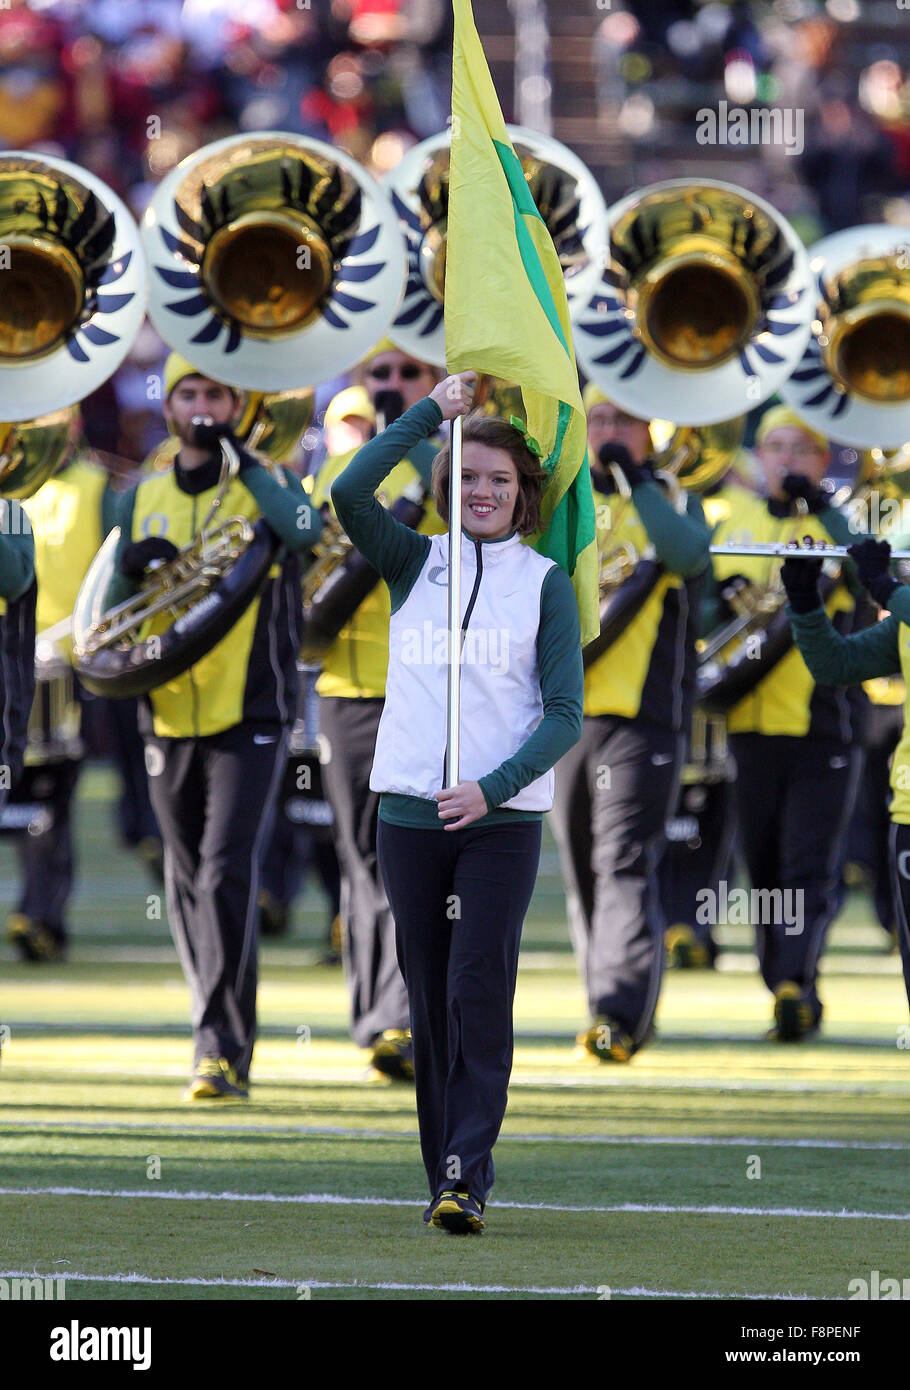 Autzen Stadium, Eugene, OR, USA. 21st Nov, 2015. The Oregon Marching band performs prior to the NCAA football game between the Ducks and the USC Trojans at Autzen Stadium, Eugene, OR. Larry C. Lawson/CSM/Alamy Live News Stock Photo